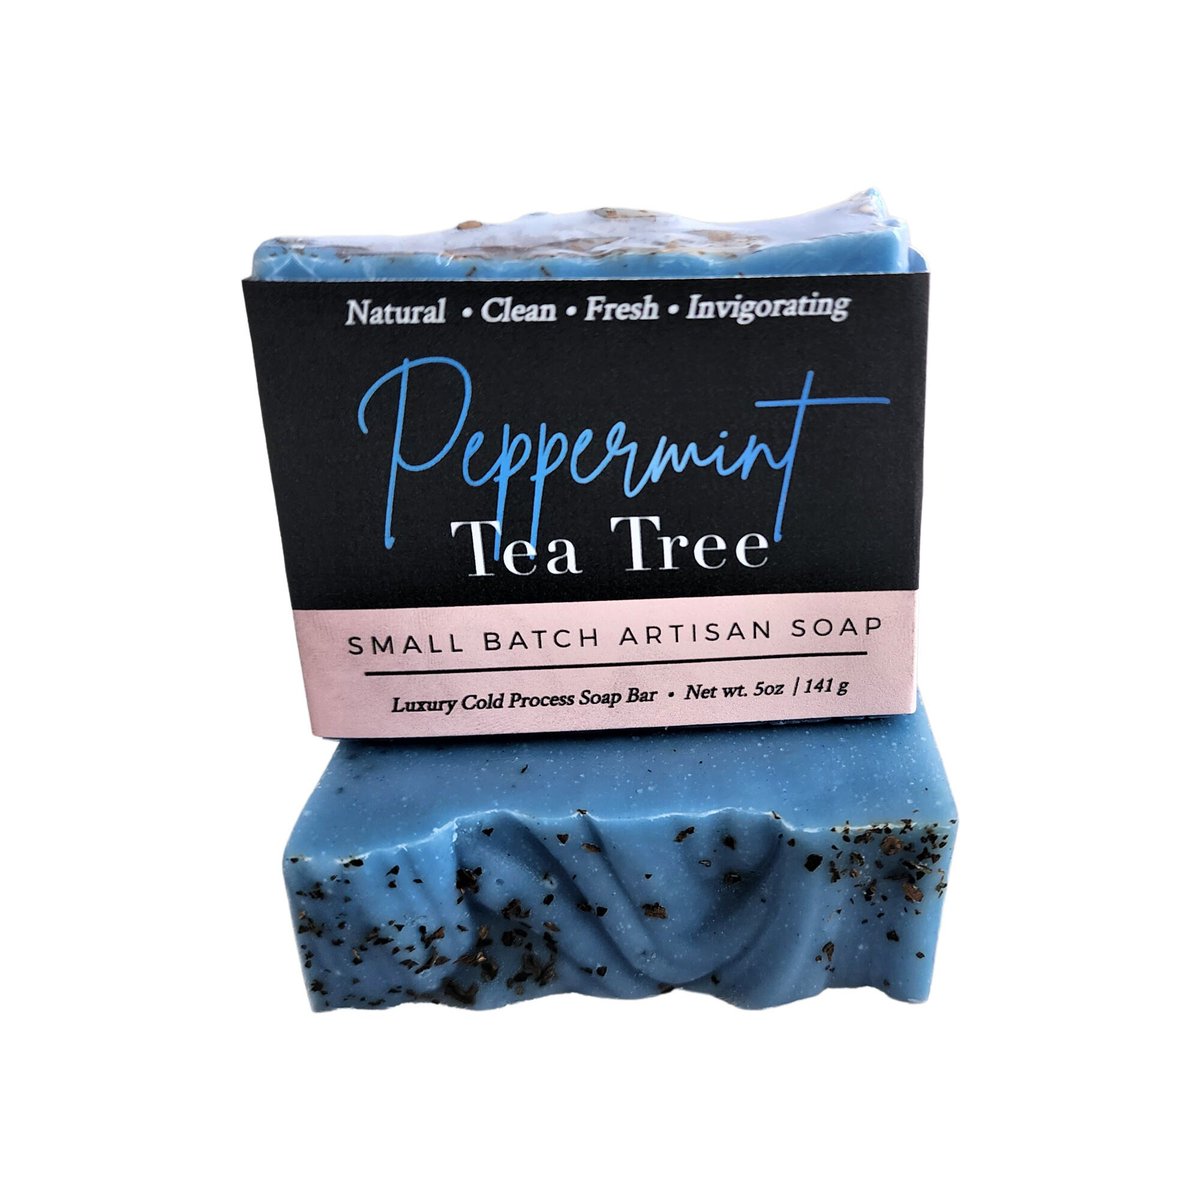 Mint Soap, Tea Tree Soap, Peppermint Soap, Organic Soap, Vegan Soap, Natural Soap, Cold Process Soap, Soap Gift, Soap for men, Blue Soap tuppu.net/7a62c5aa #DeShawnMarie #handmadesoap #gifts #selfcare #soap #Christmasgifts #Soapgift #Etsy #SoapGift